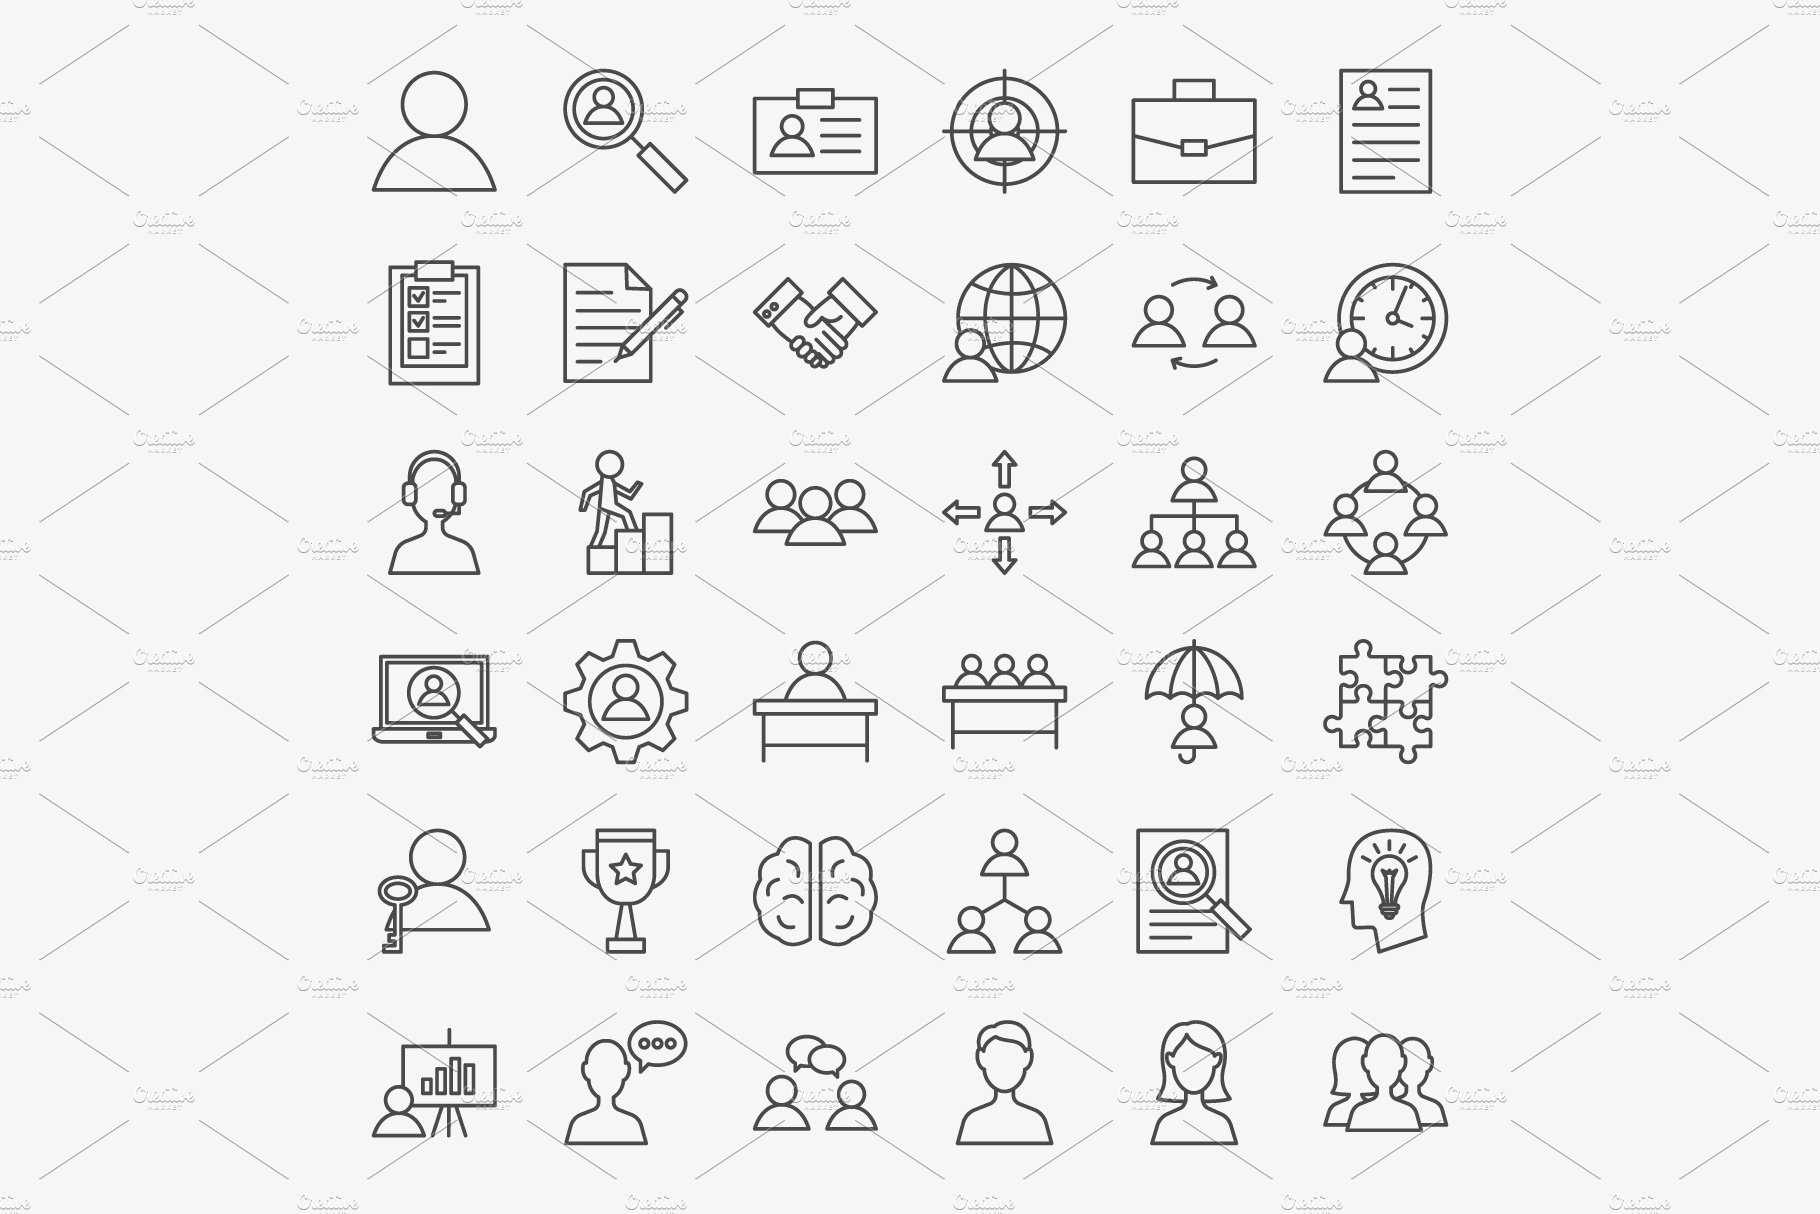 Simple icons for interesting presentations.